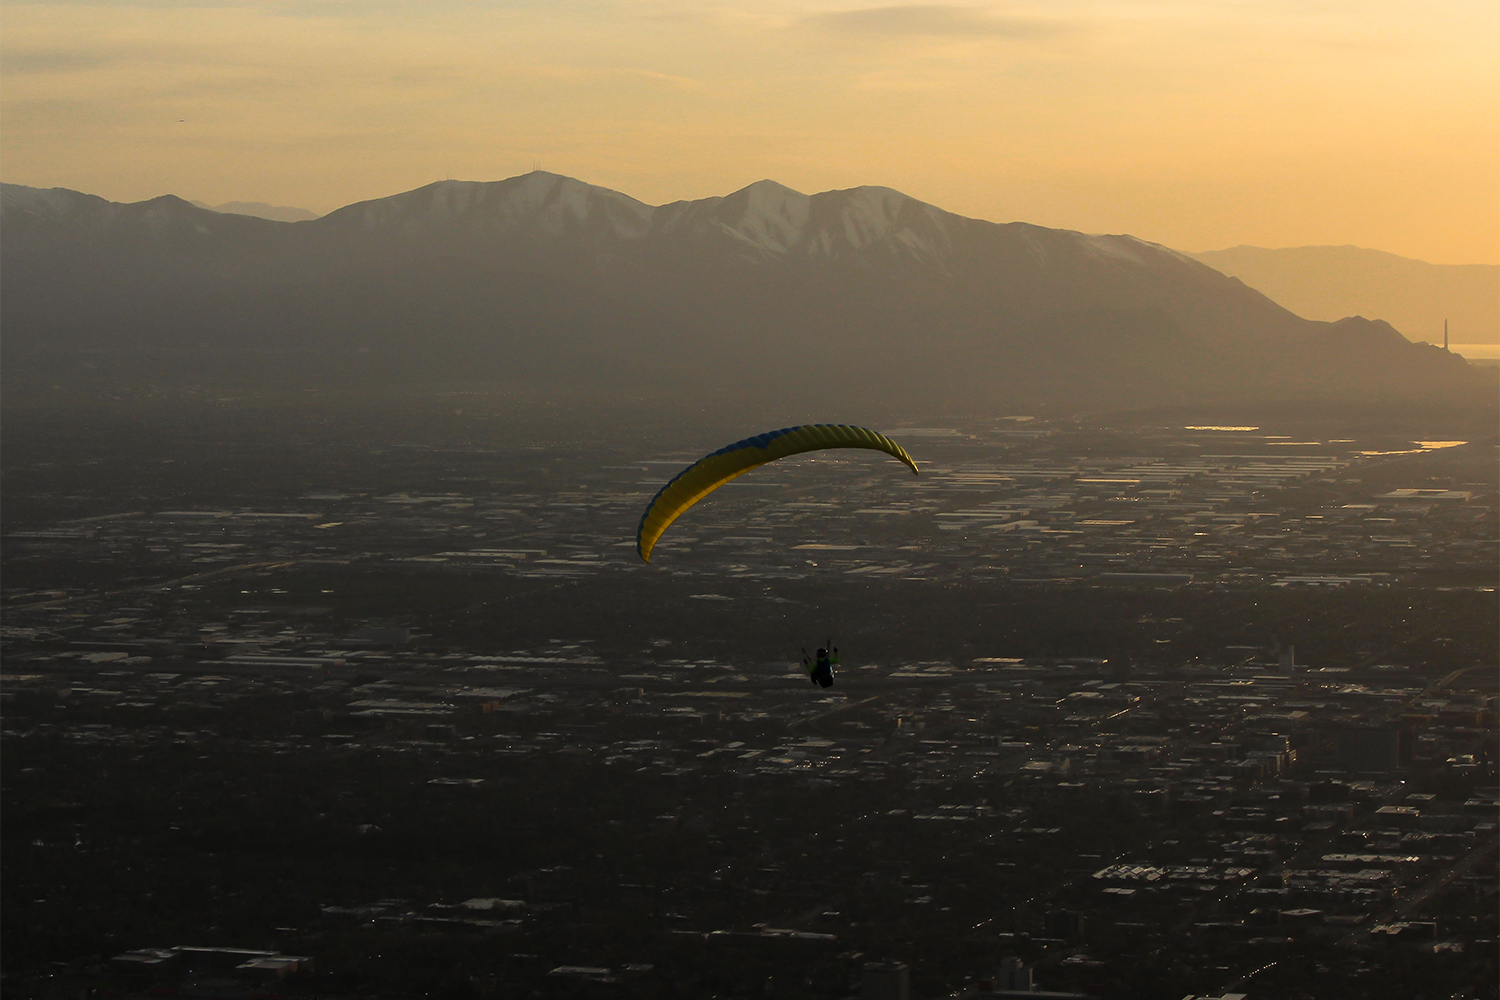 A paraglider flying over Salt Lake City, Utah, at sunset, with the mountains in the background under a yellow sky